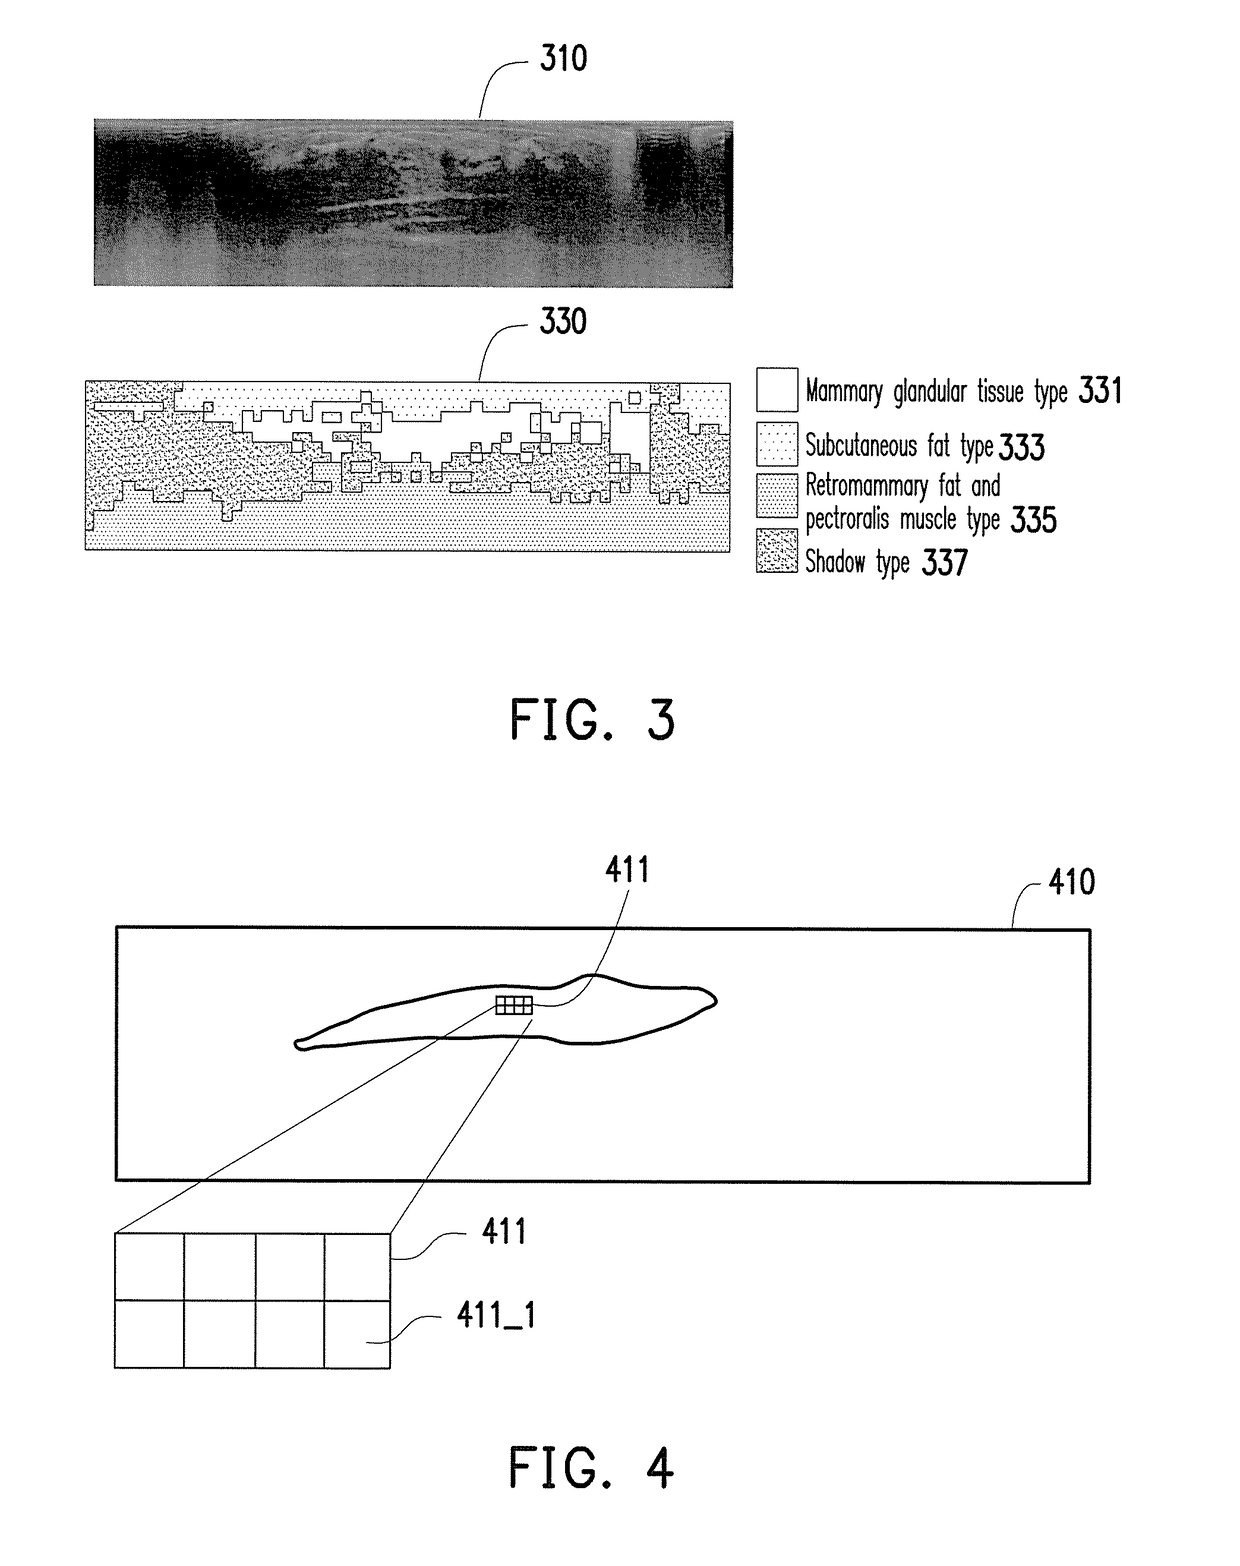 Medical image processing apparatus and breast image processing method thereof